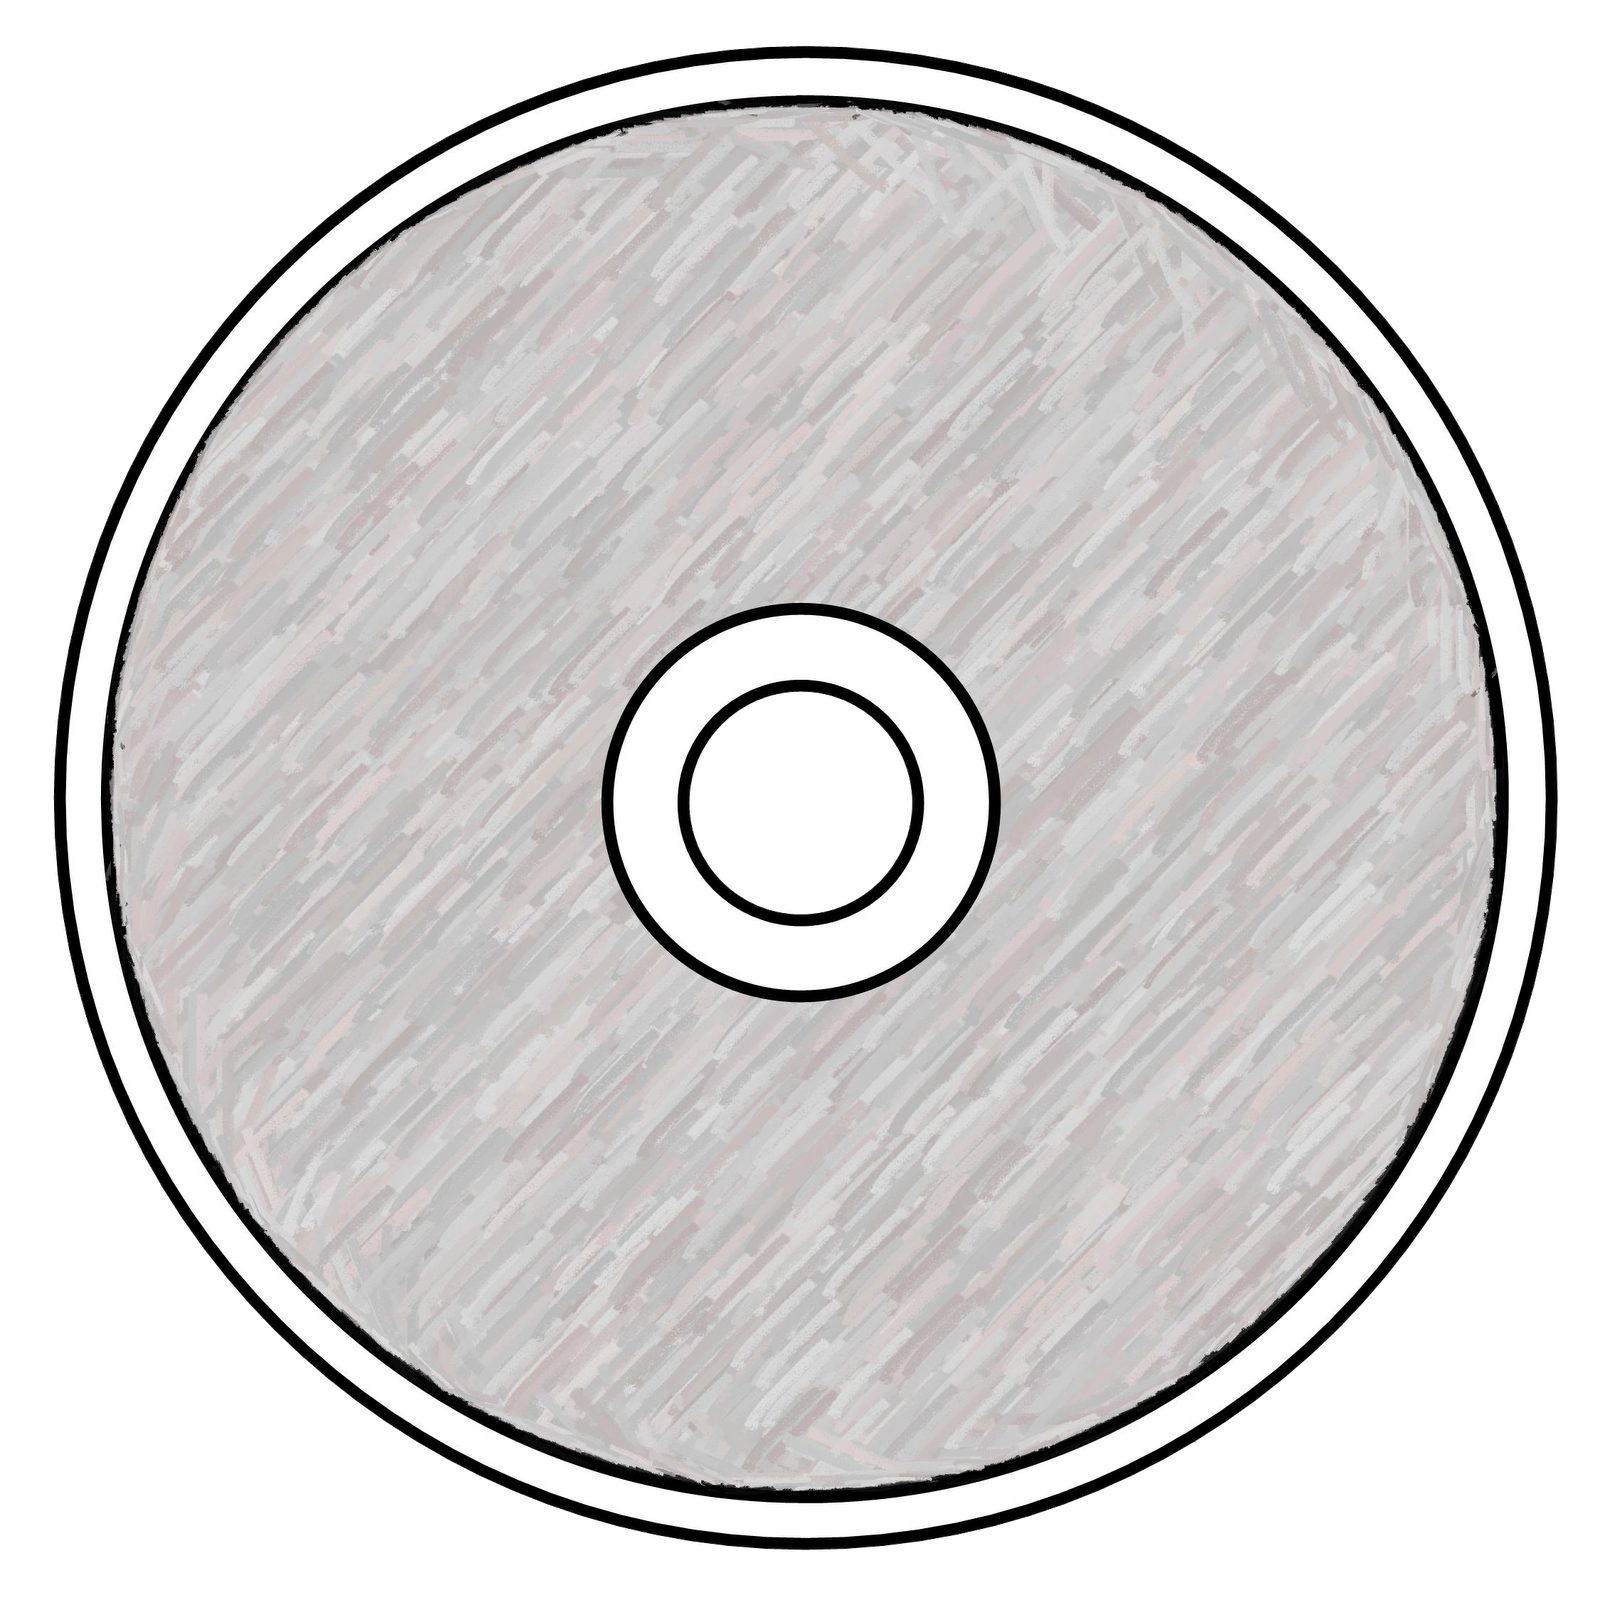 Clipart Cd - Cliparts.co